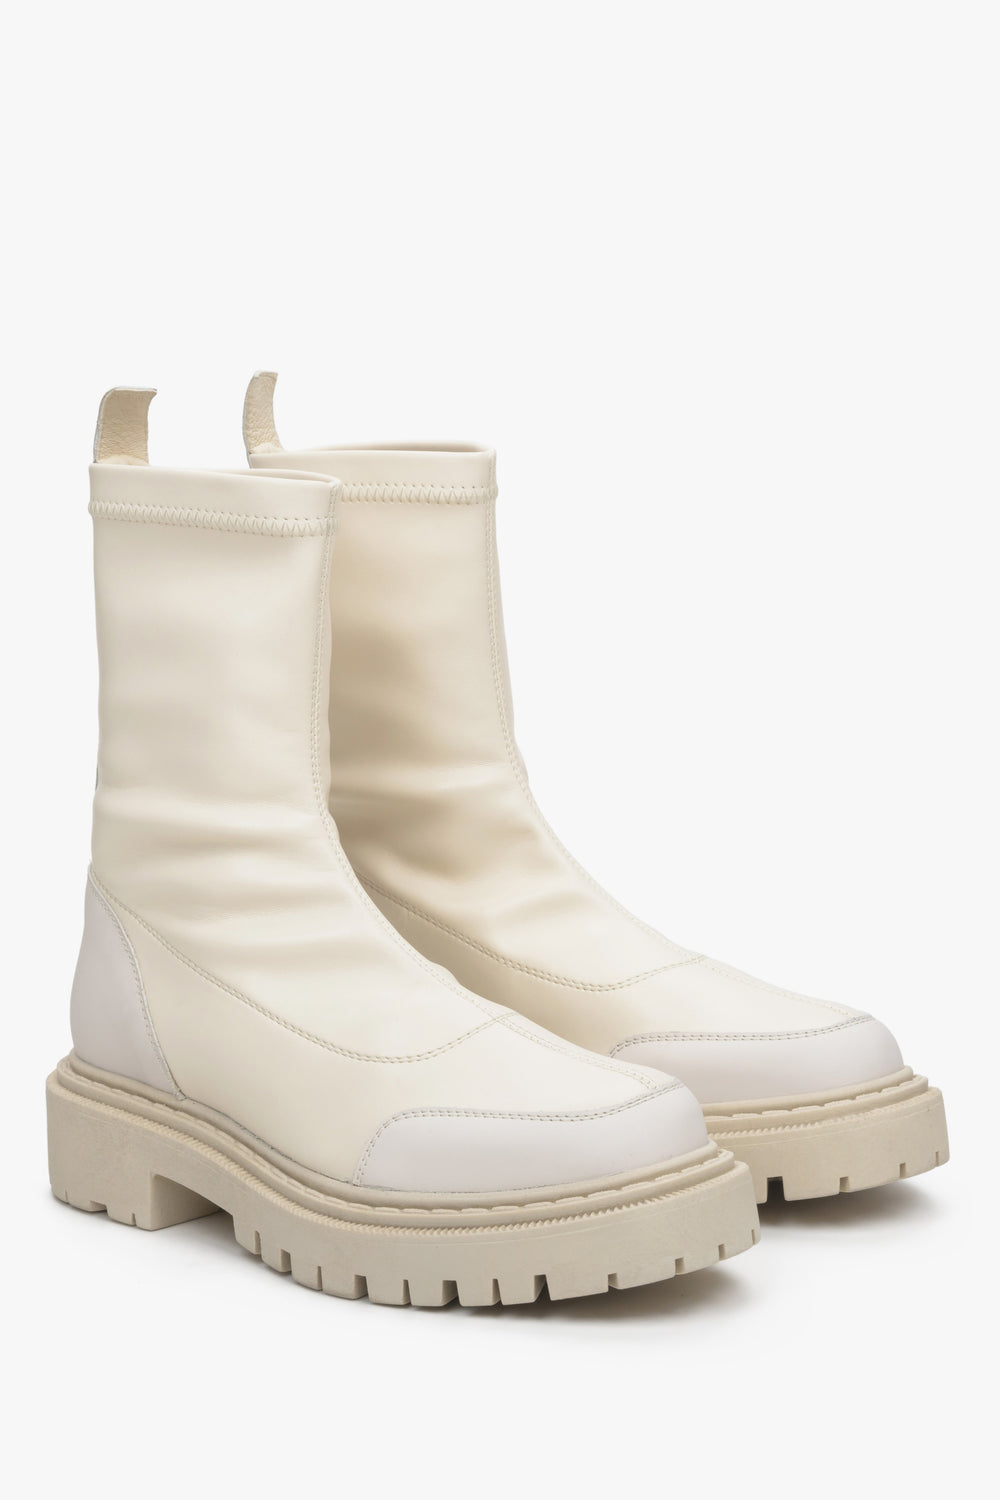 Elegant beige women's ankle boots natural leather by Estro.